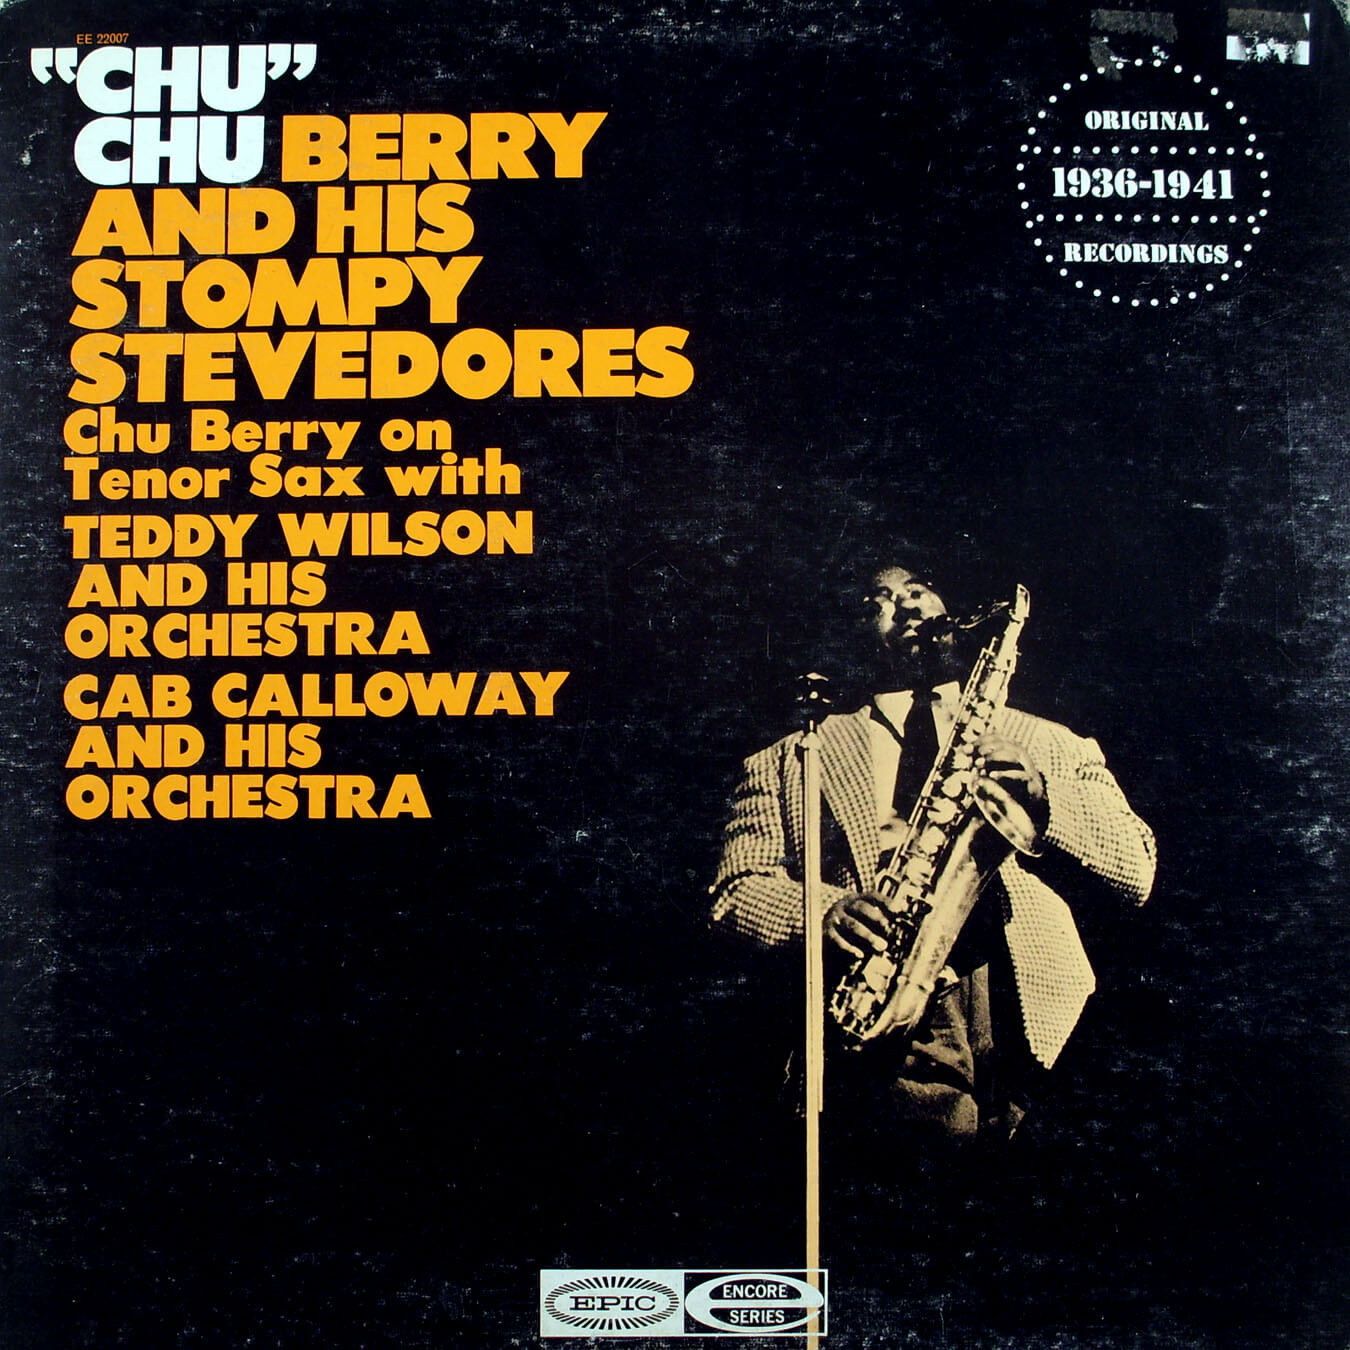 chu-berry-and-his-stompy-stevedores-front5